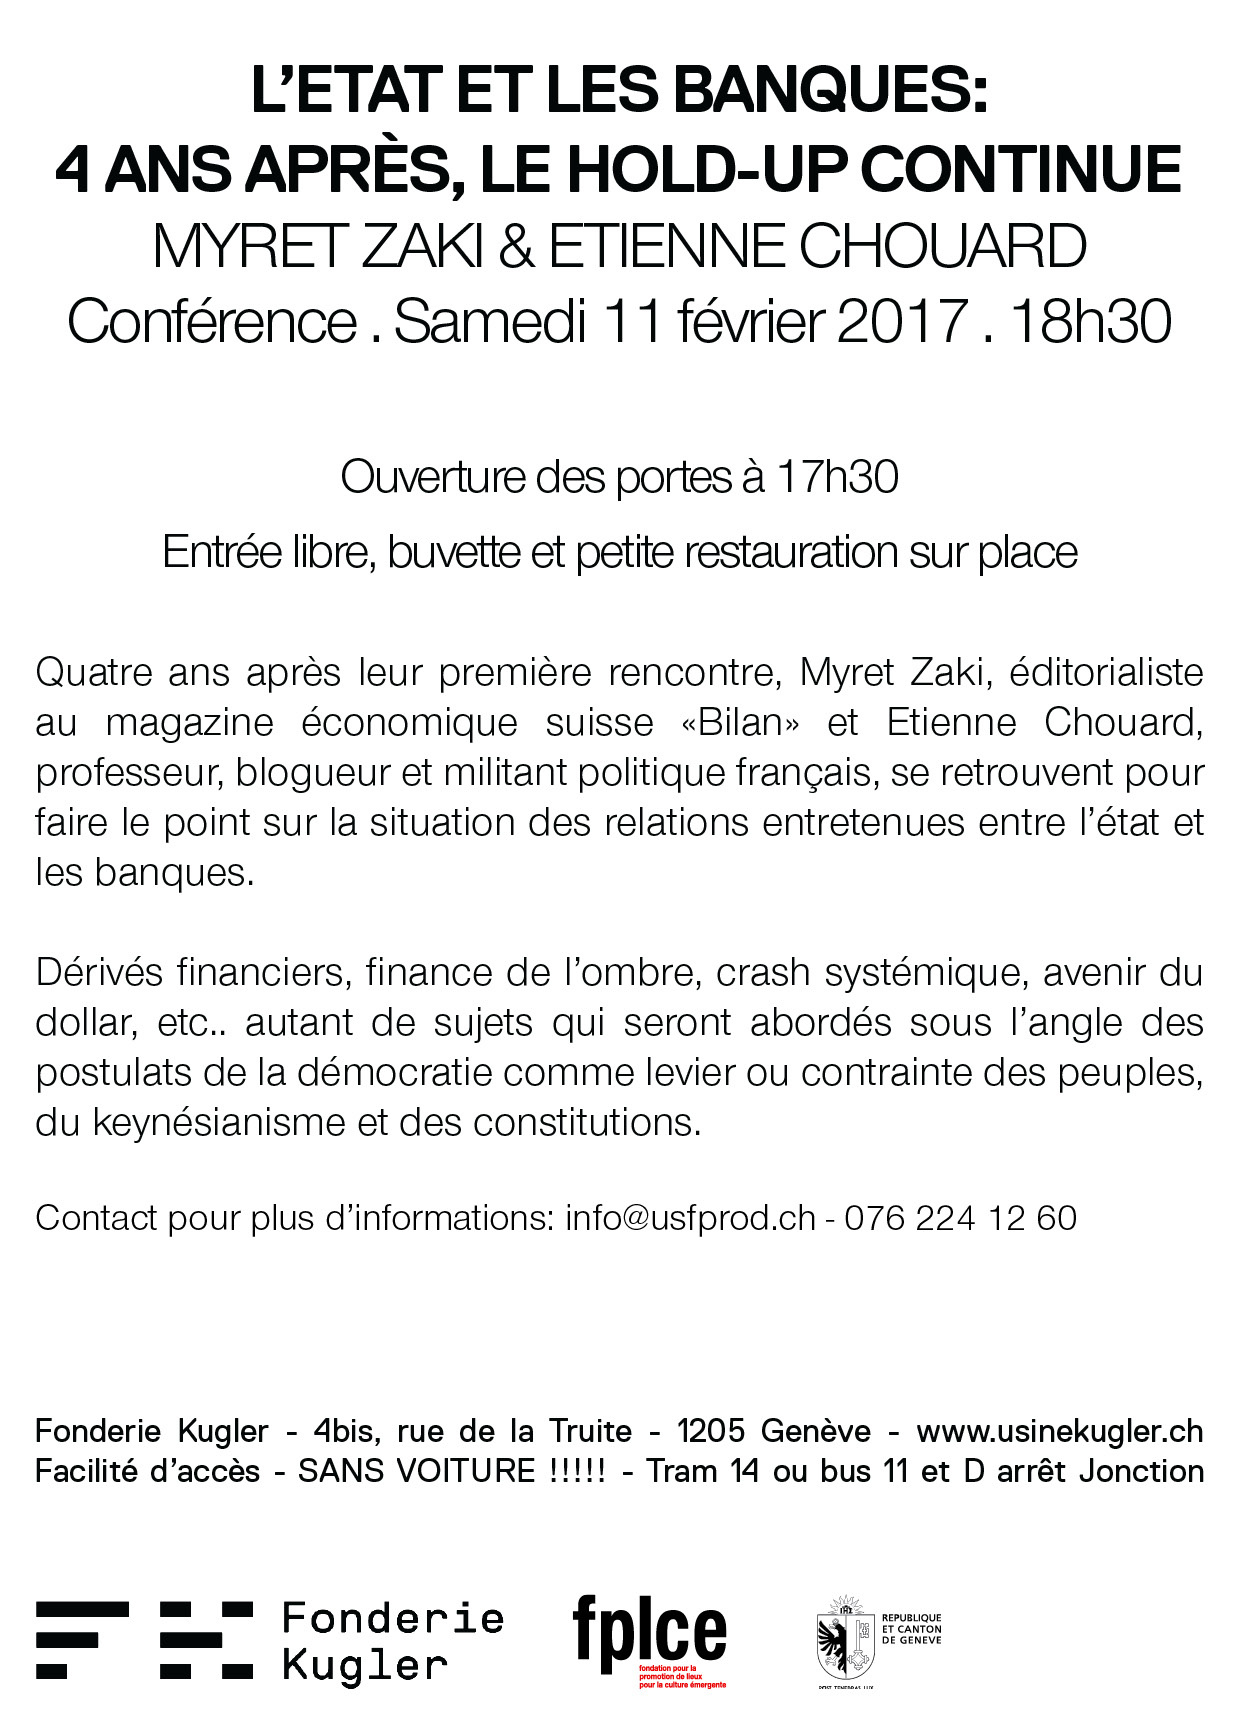 Conference Fonderie Banque2